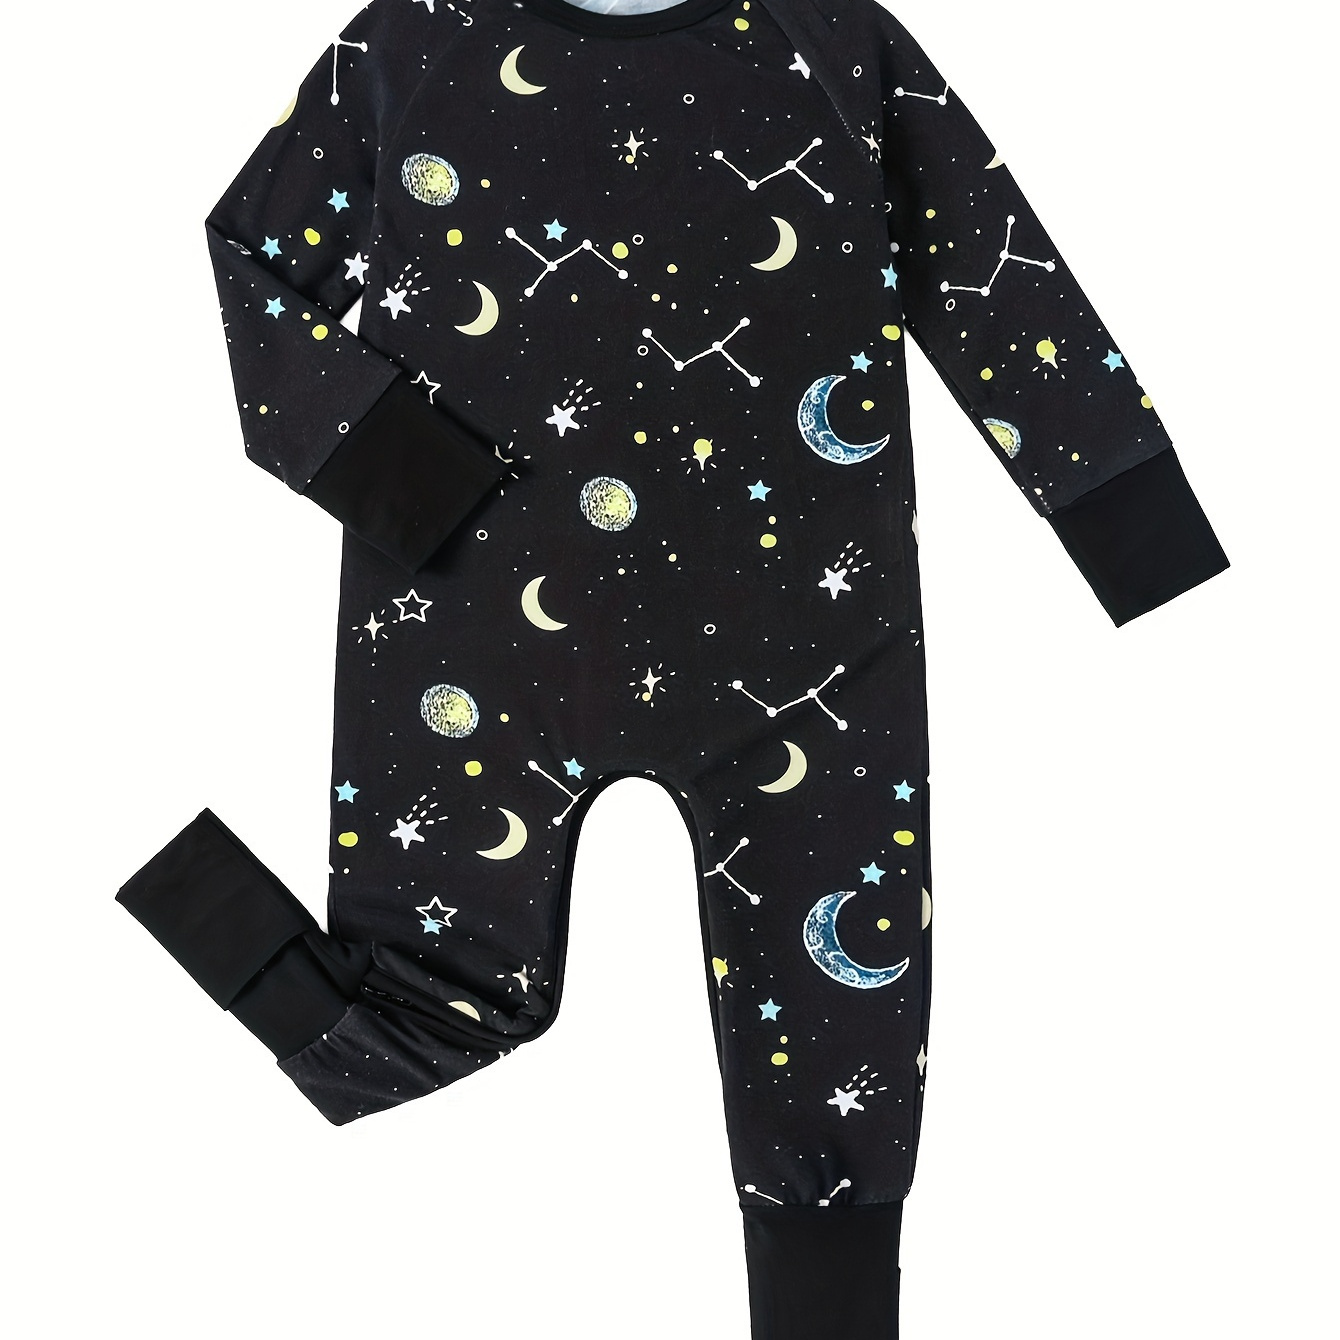 

Infant's Bamboo Fiber Star & Moon Pattern Bodysuit, Comfy Long Sleeve Onesie With Foldable Foot Cover, Baby Boy's Clothing, As Gift